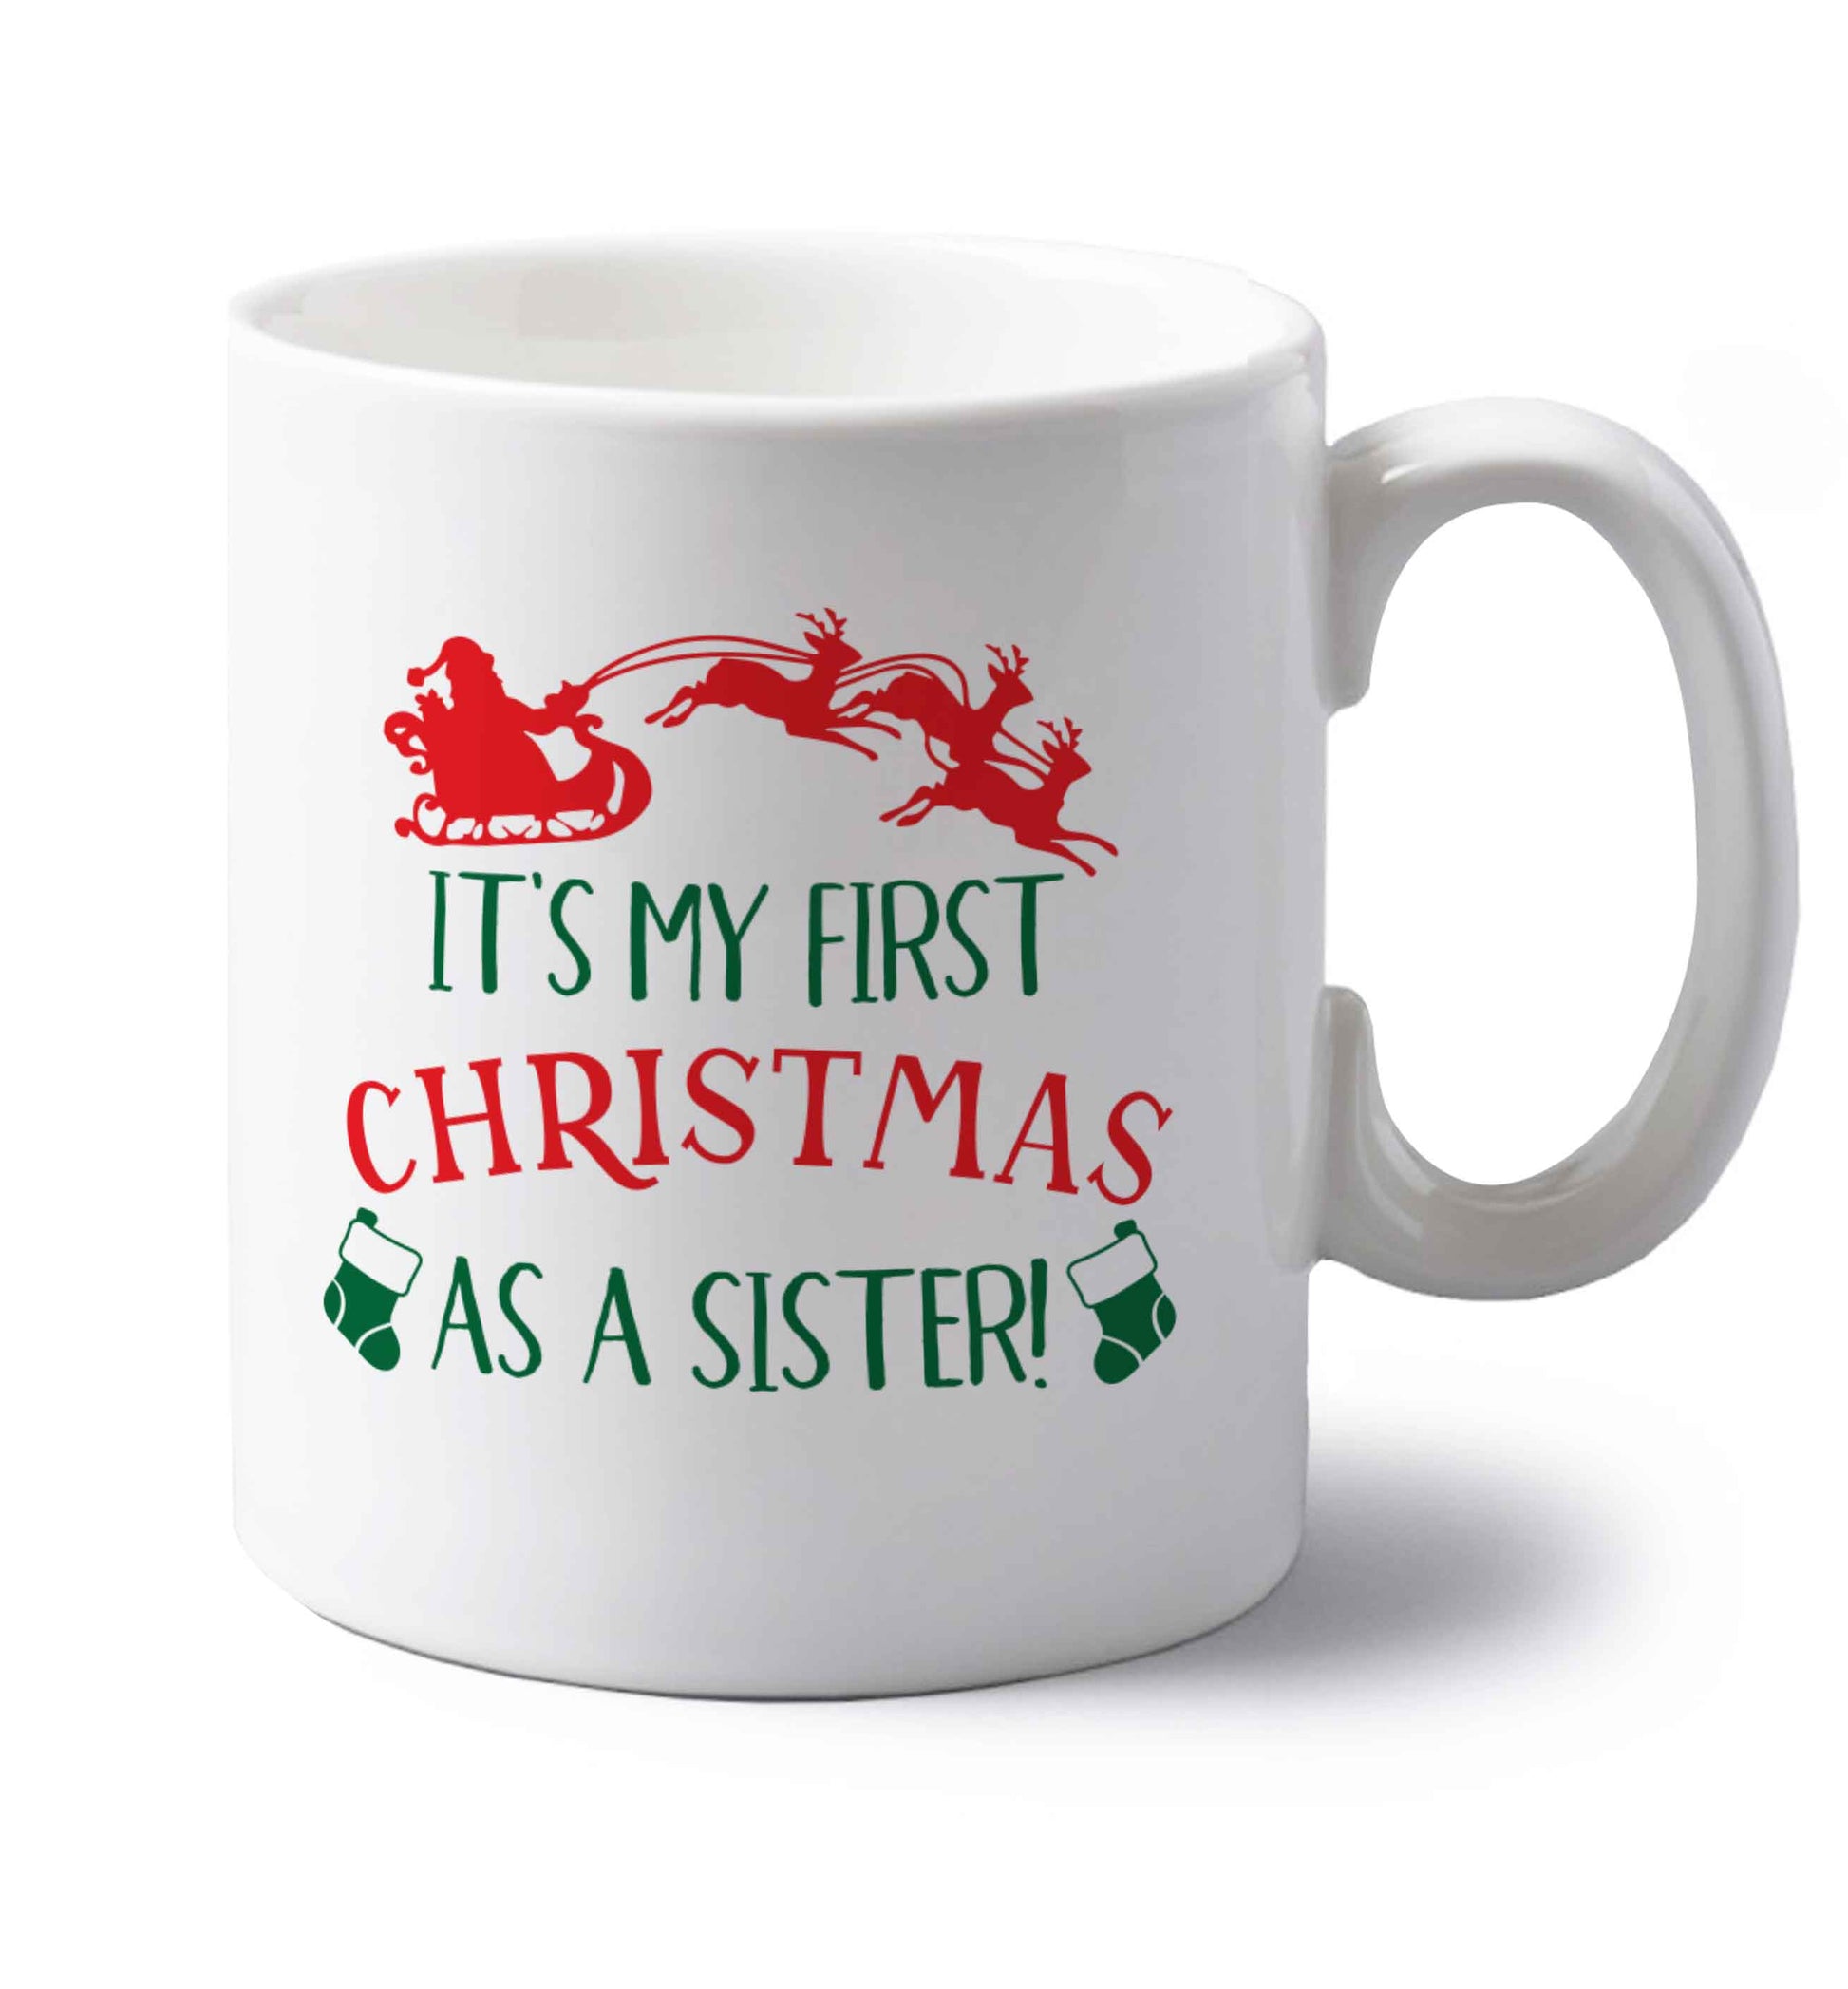 It's my first Christmas as a sister! left handed white ceramic mug 